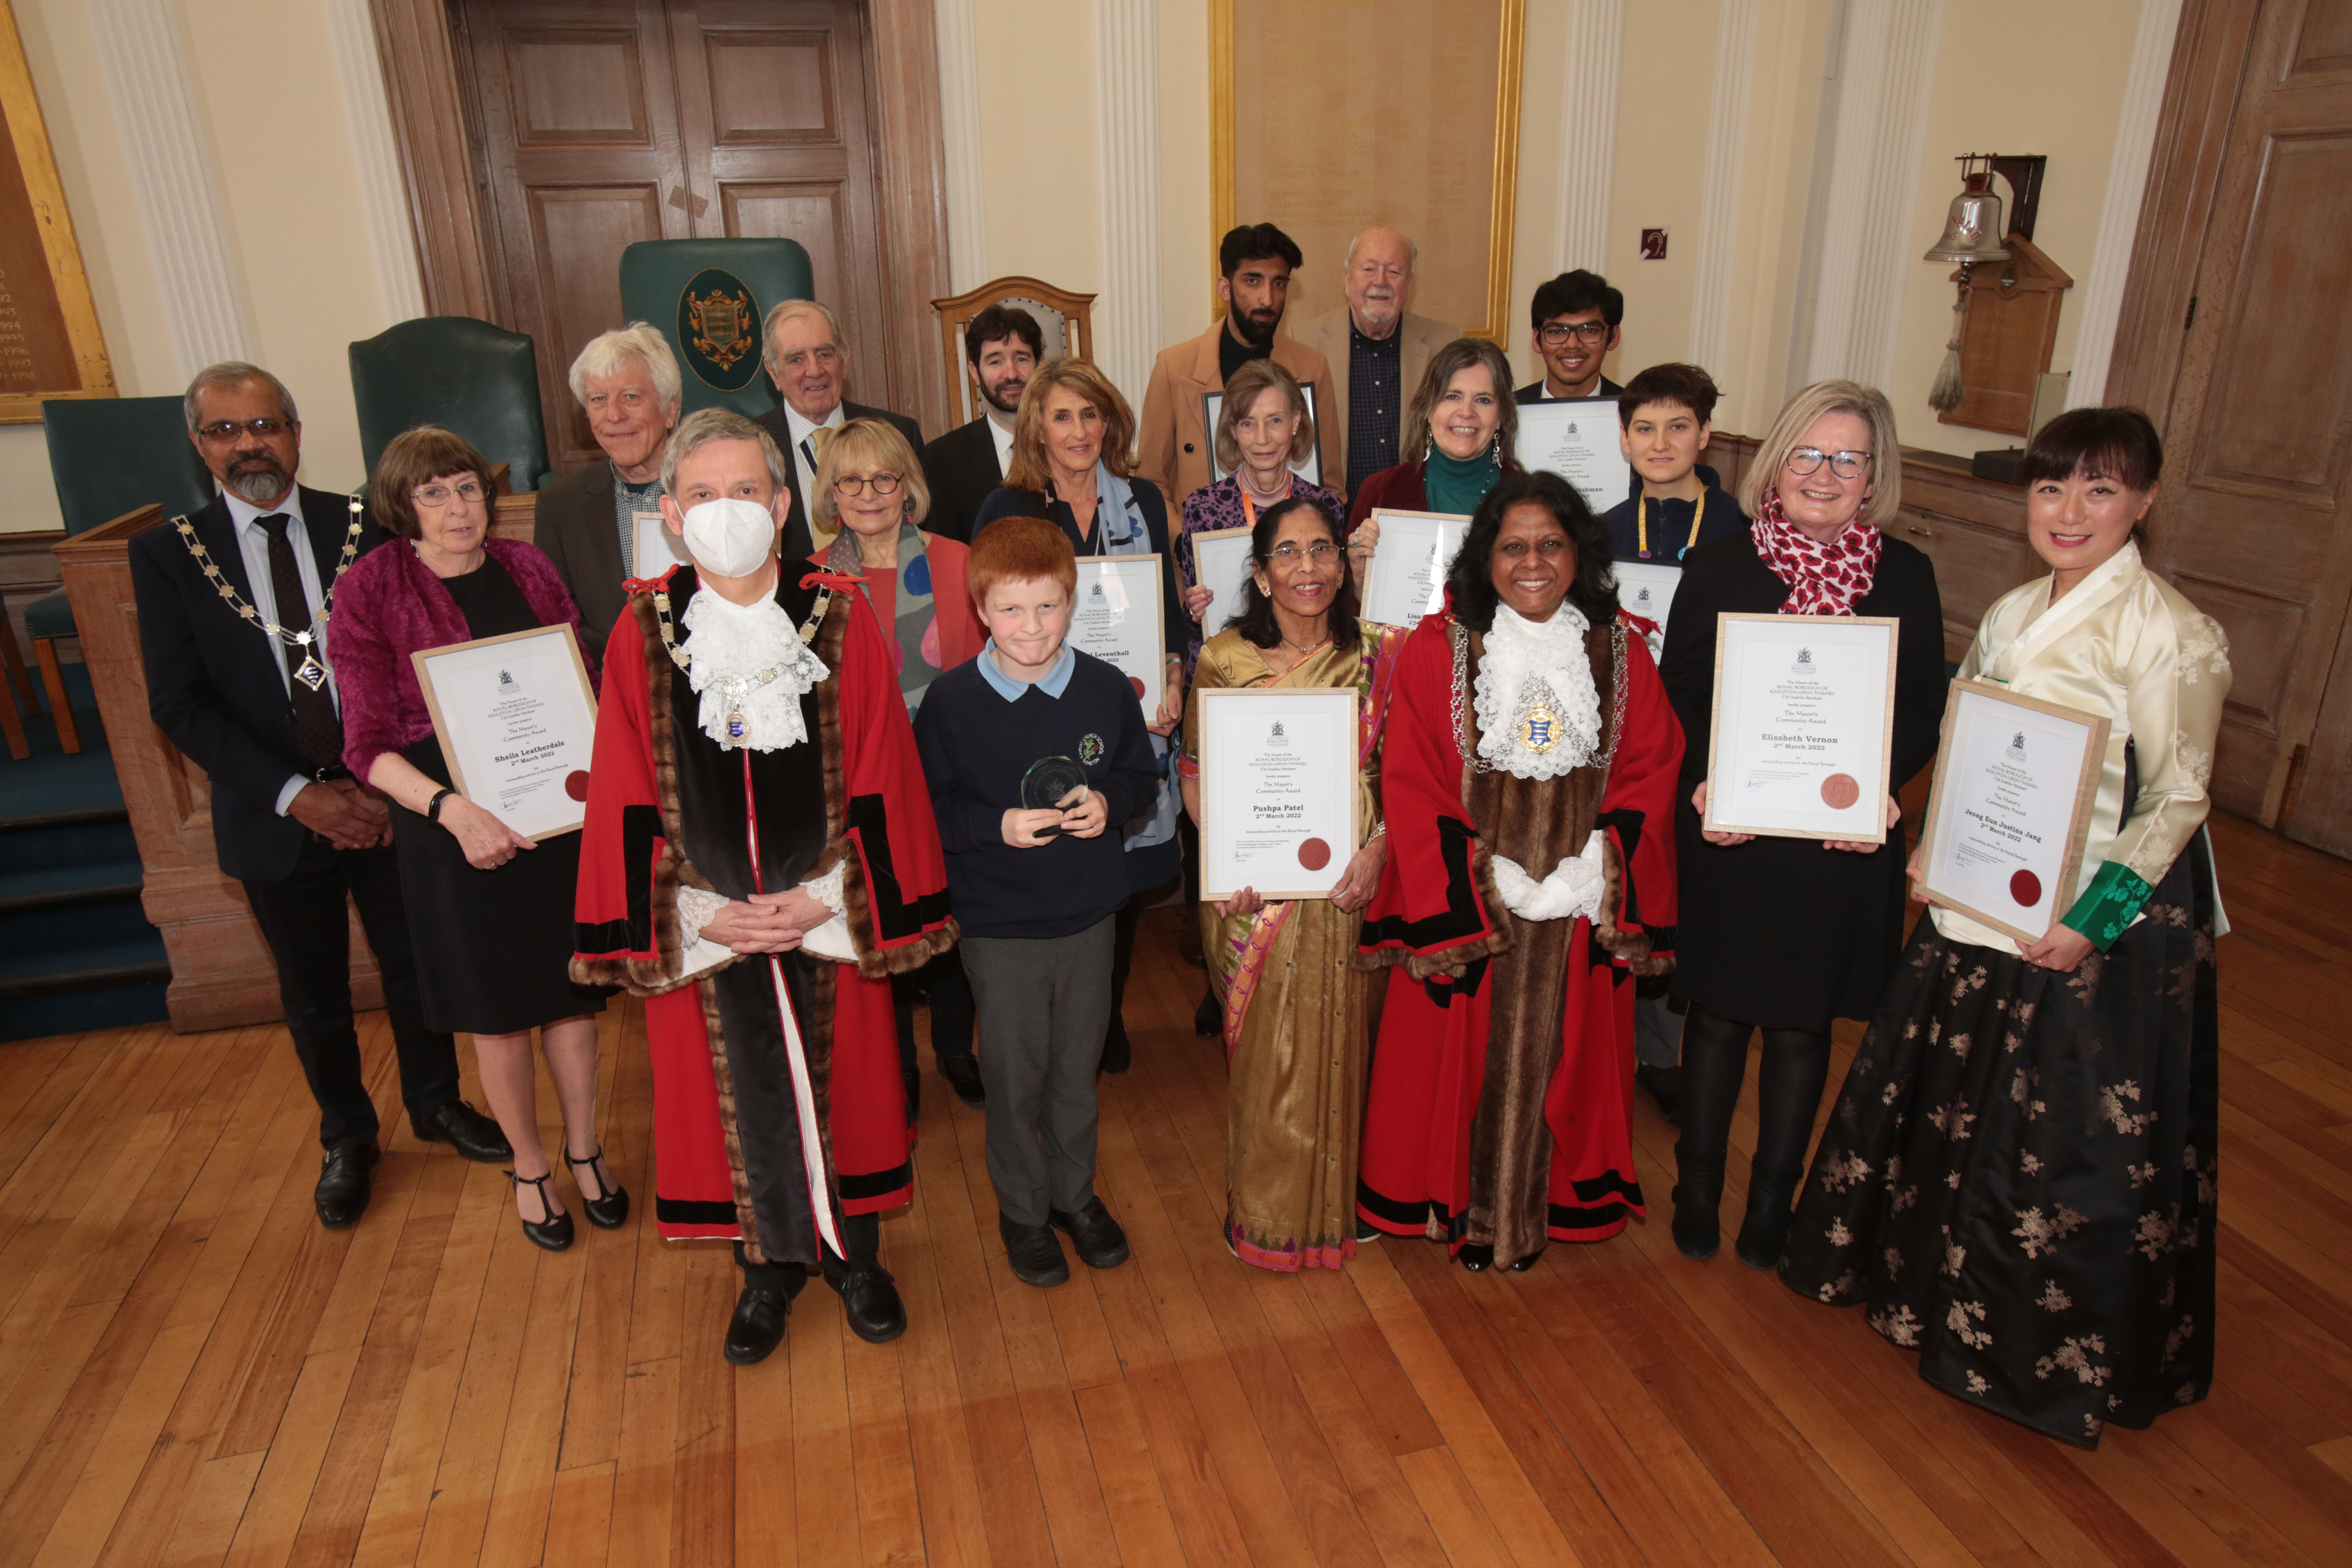 The Mayor of Kingston with the winners of Community Awards, along with the Leader of the Council, Deputy Mayor and the Mayor's Consort.